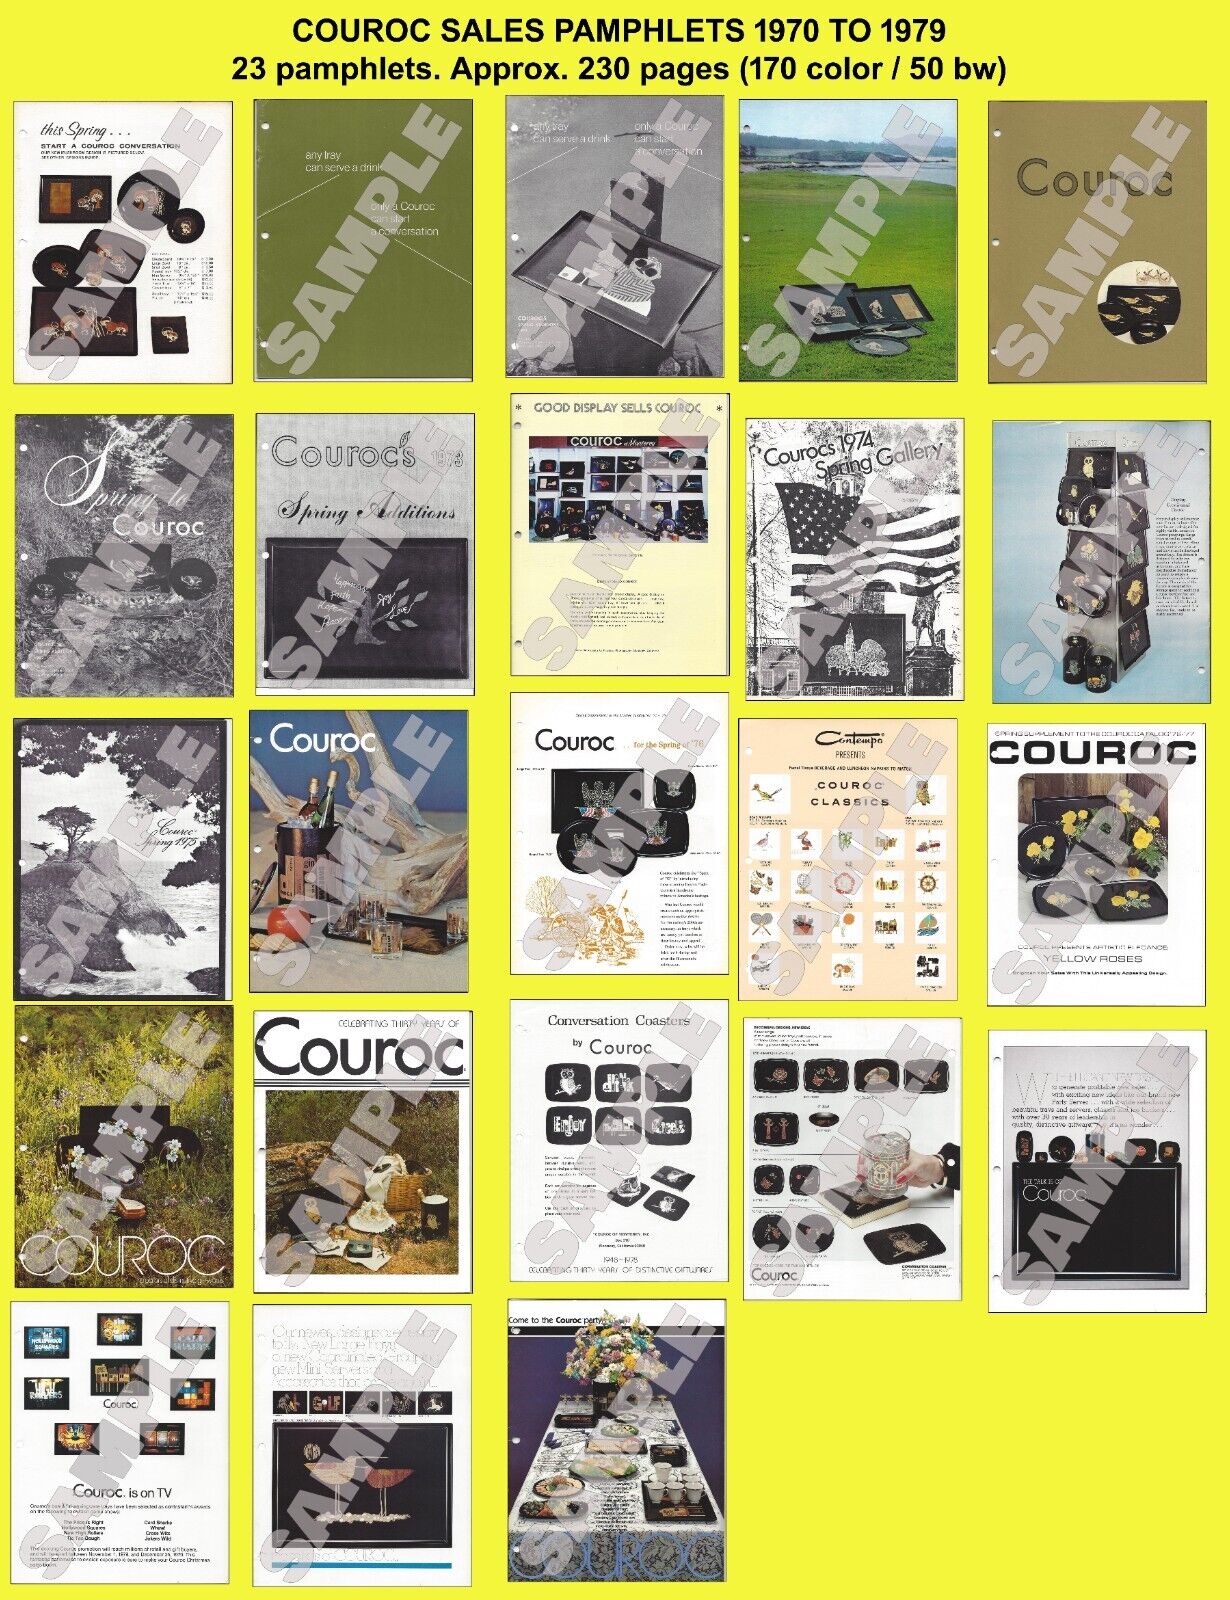 Couroc of Monterey 51 Product Pamphlets 1958-1985 PDFs approx. 426 pages on CD.